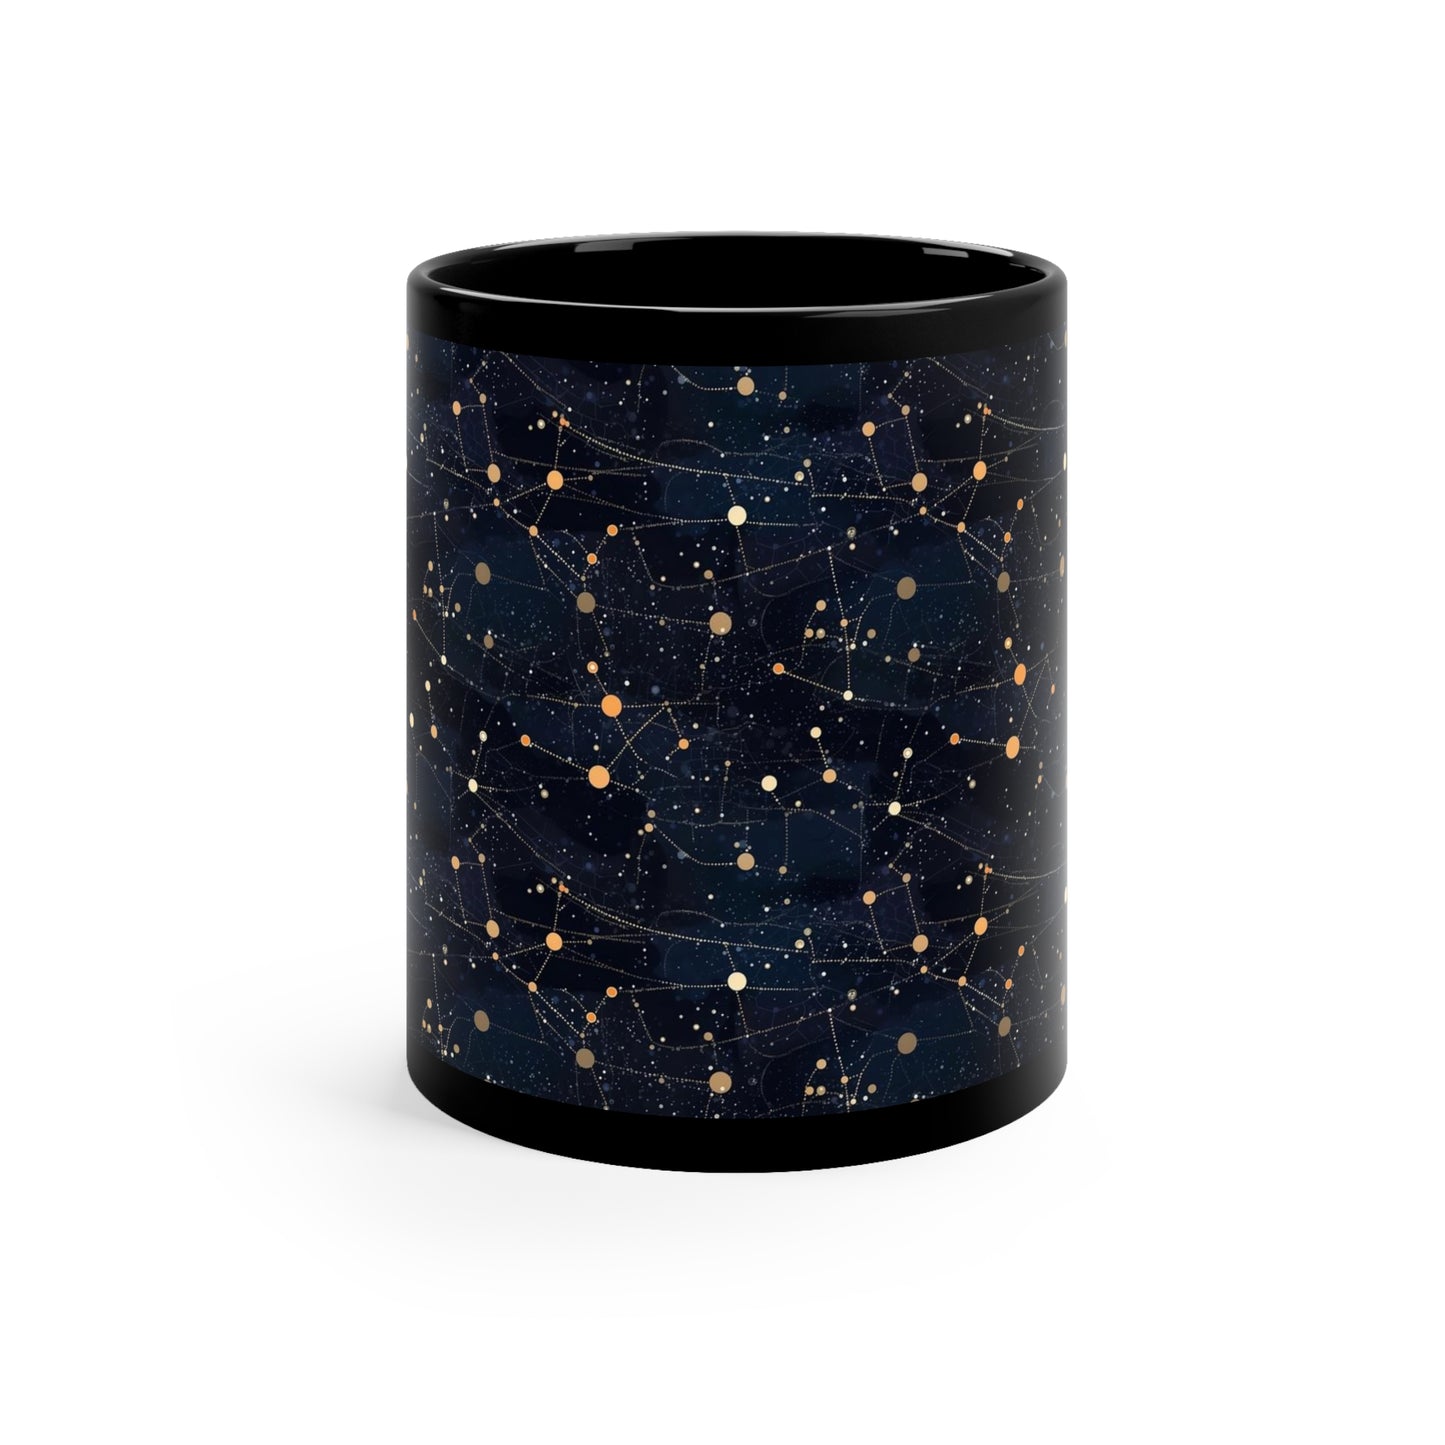 Constellation Coffee Mug, Black Universe Space Celestial Art Ceramic Cup Tea Hot Chocolate Unique Microwave Safe Novelty Cool Gift Starcove Fashion